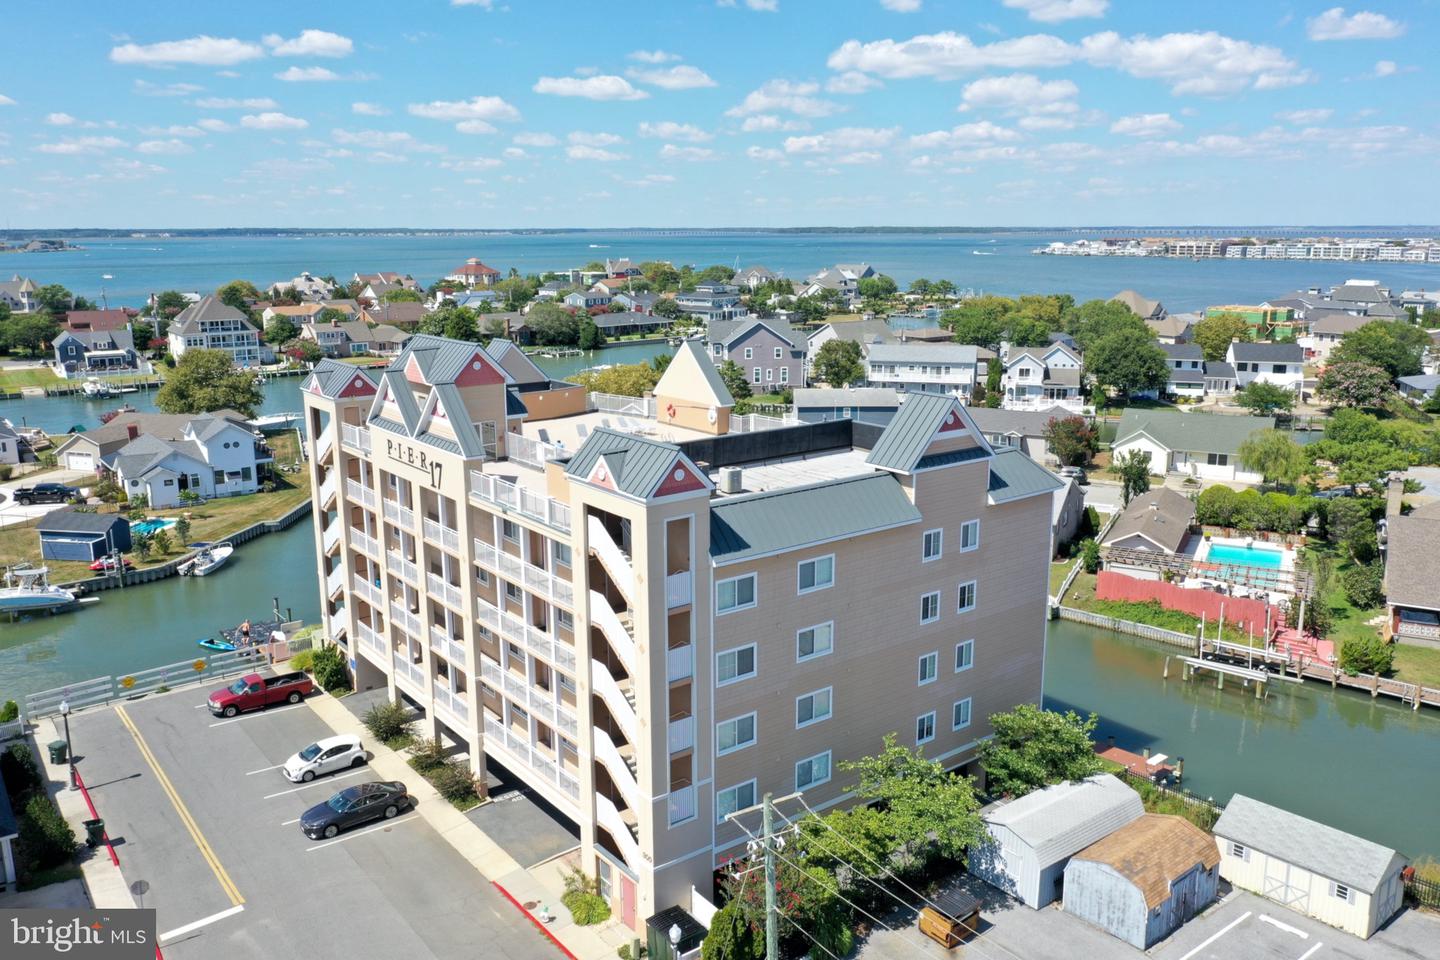 MDWO2019672-802922397332-2024-03-15-14-18-06 300 17th St #303 | Ocean City, MD Real Estate For Sale | MLS# Mdwo2019672  - 1st Choice Properties